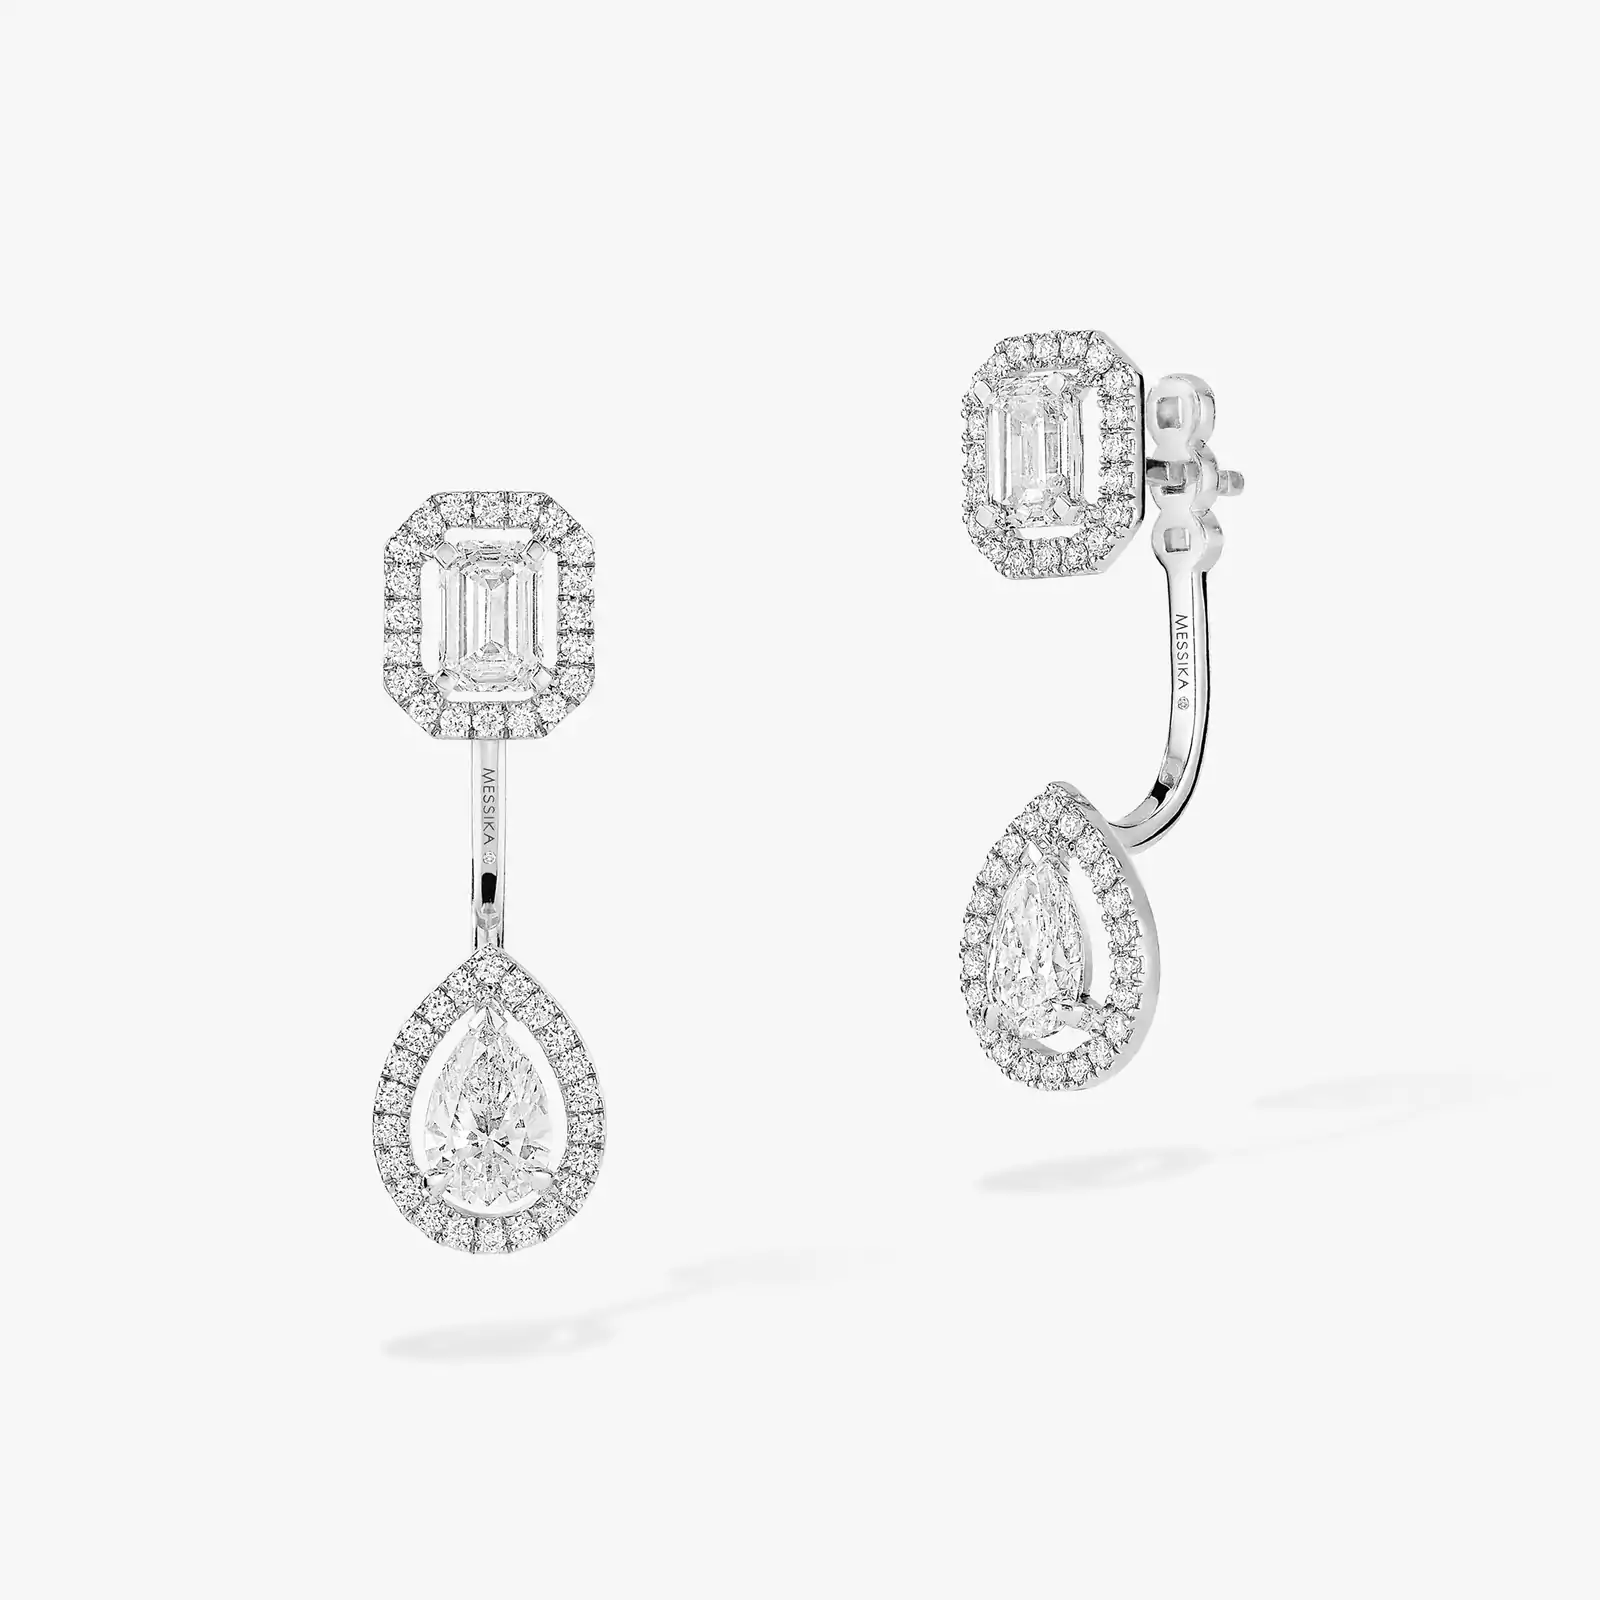 Earrings For Her White Gold Diamond My Twin Toi & Moi 0.30ct x2 06505-WG